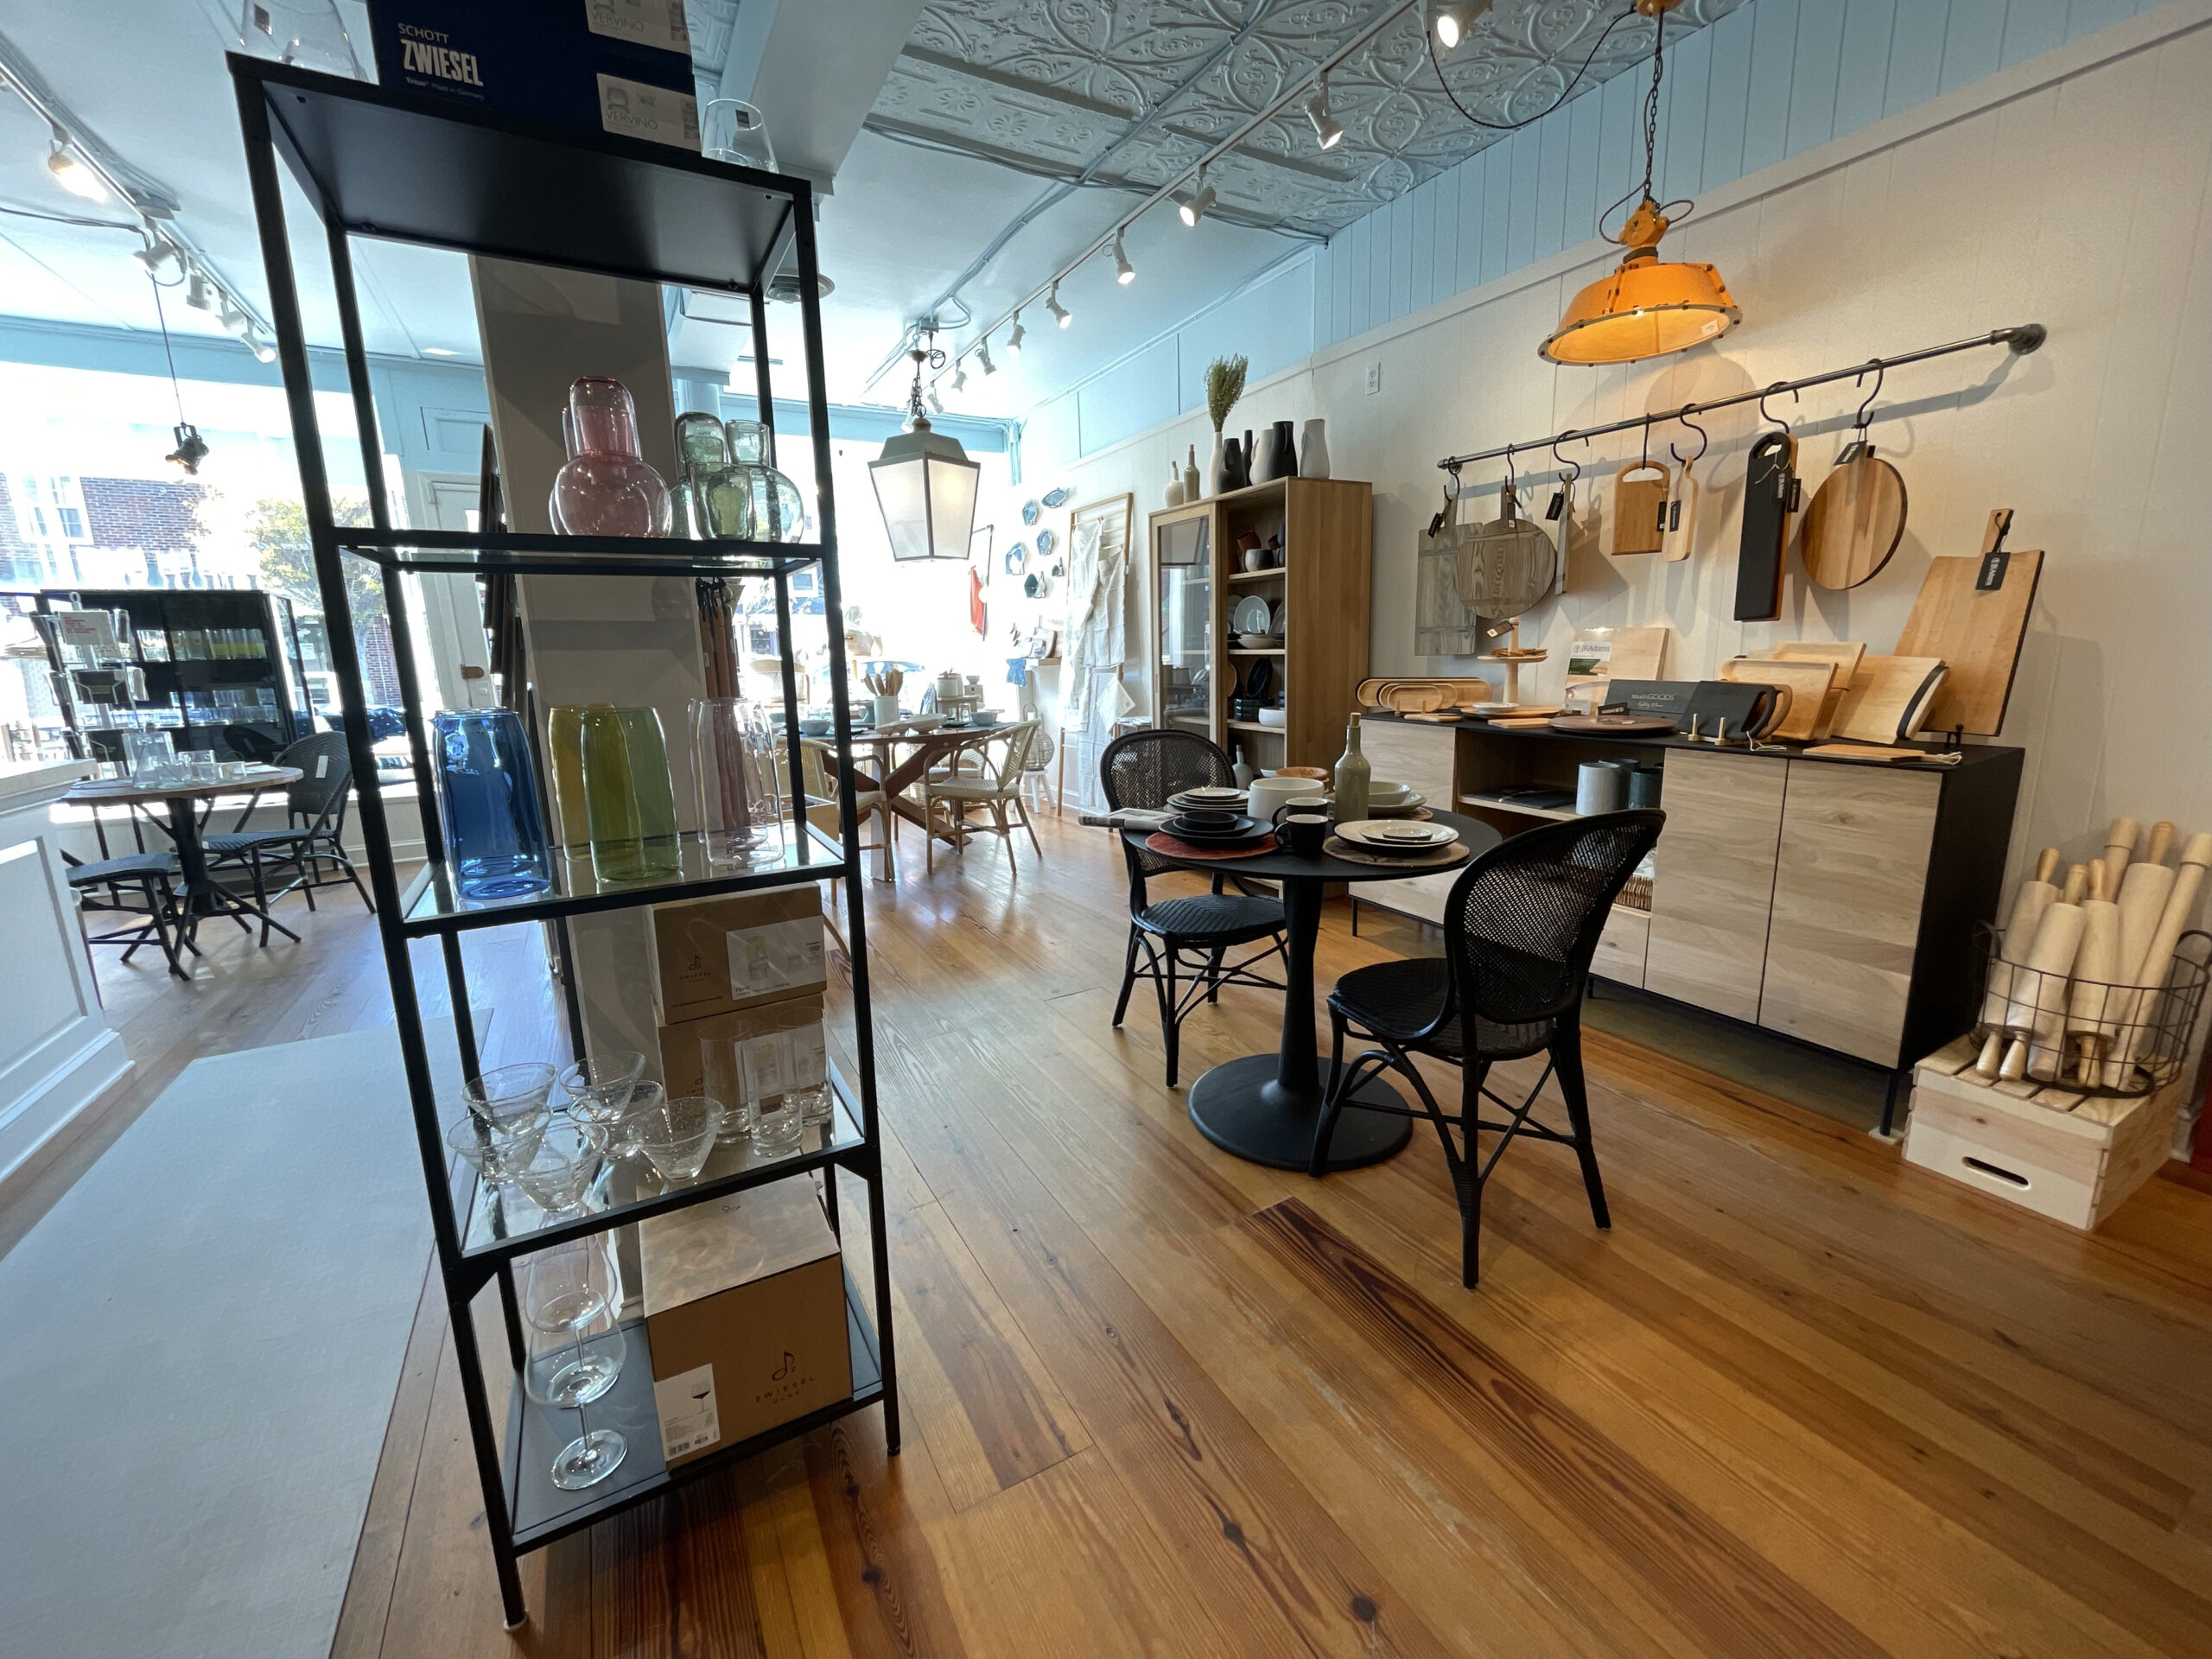 touchGOODS Offers One-Stop Shop For Home Furnishing Needs